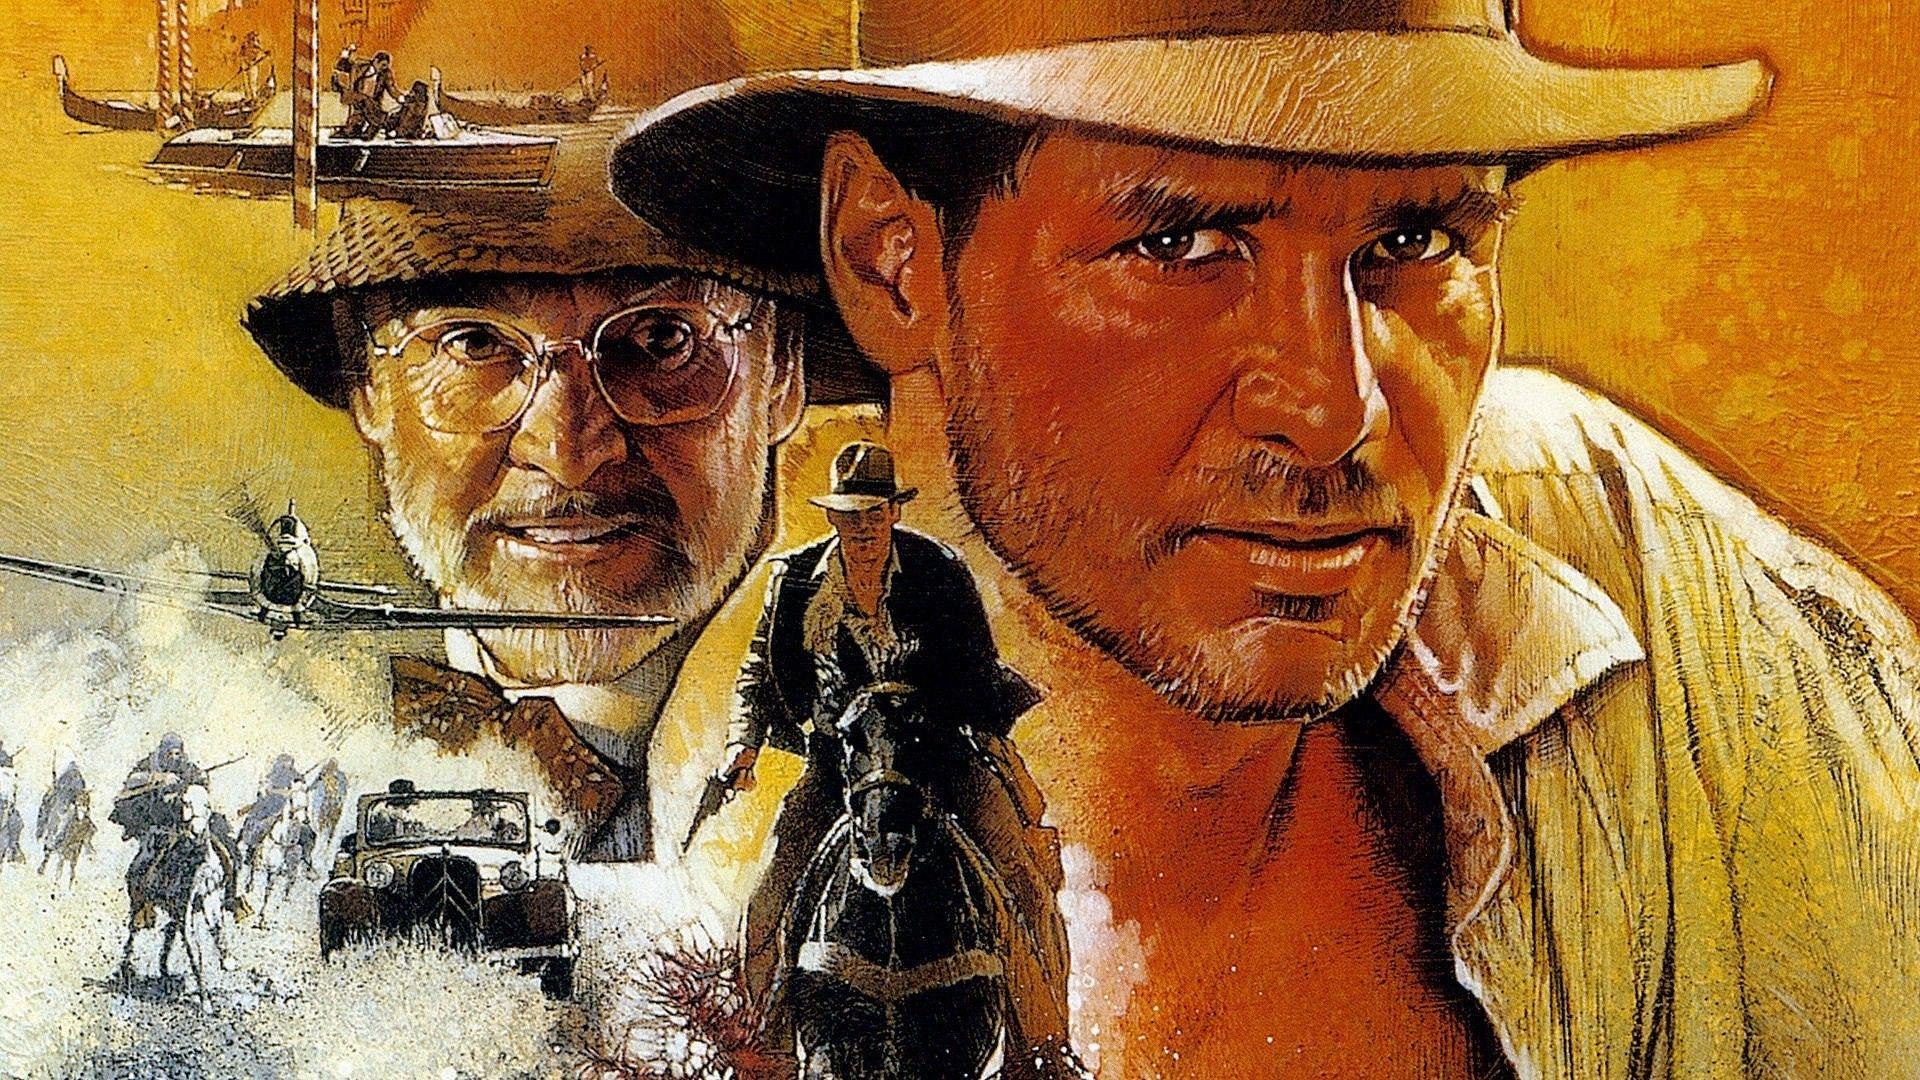 A Case for the Classics: Indiana Jones and the Last Crusade